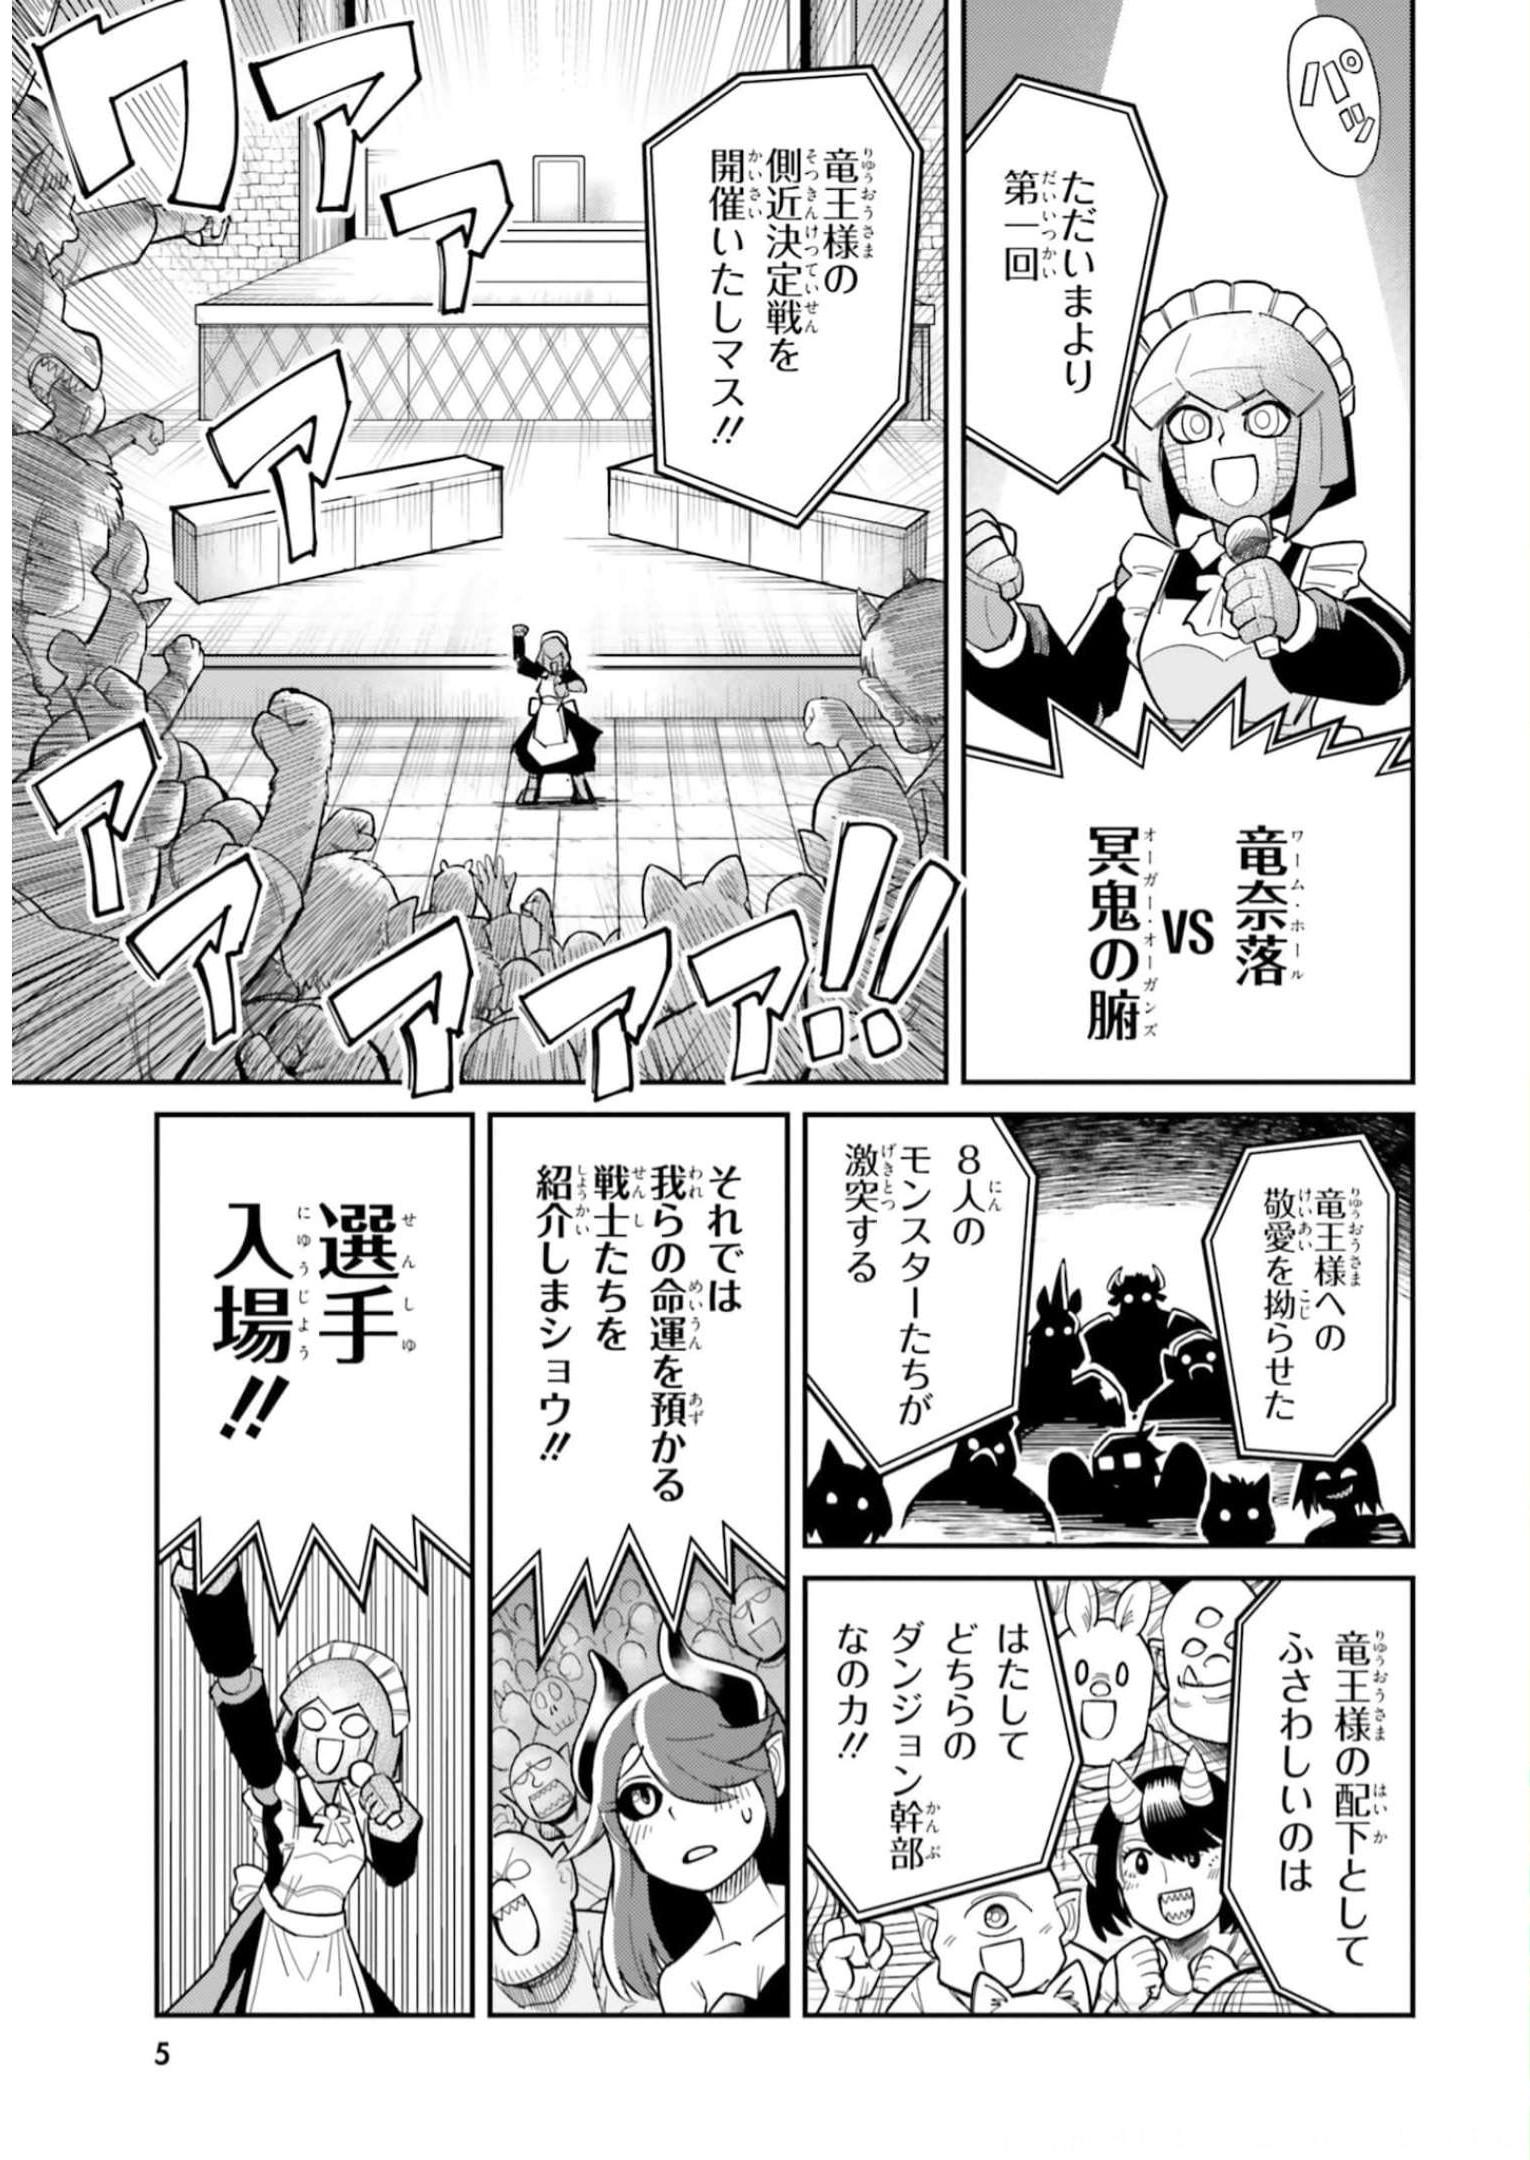 Dungeon Friends Forever Dungeon’s Childhood Friend ダンジョンの幼なじみ 第19話 - Page 6